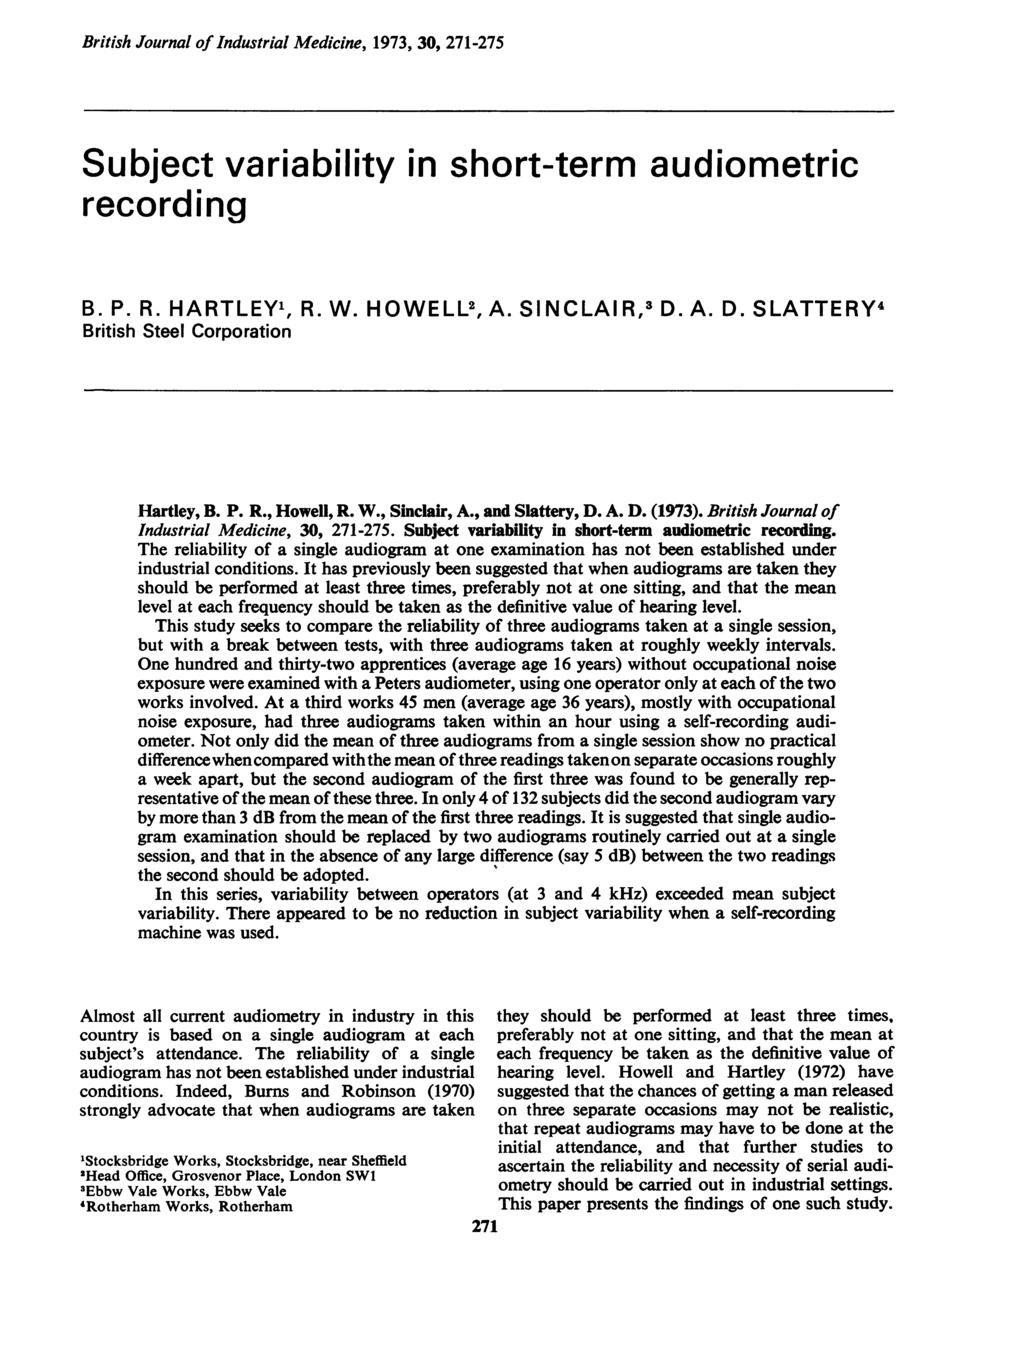 British Journal of Industrial Medicine, 1973, 30, 271-275 Subject variability in short-term audiometric recording B. P. R. HARTLEY', R. W. HOWELL2, A. SINCLAIR,3 D.